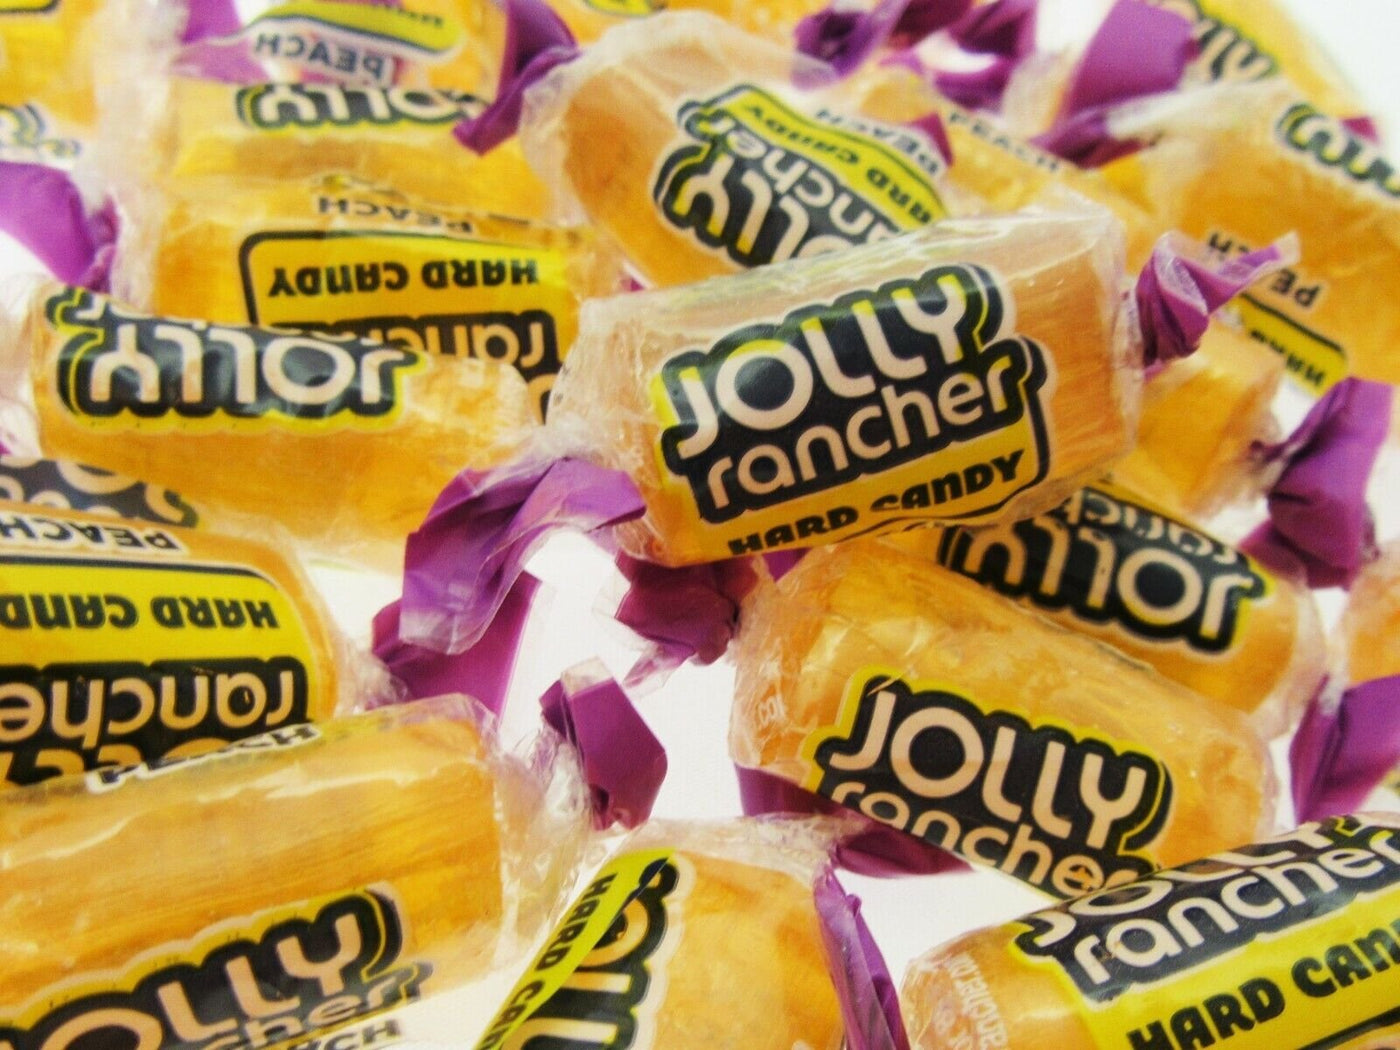 Jolly Rancher PEACH - 8oz Hard candy candies Half Pound Sweets ~ NEW FLAVOR